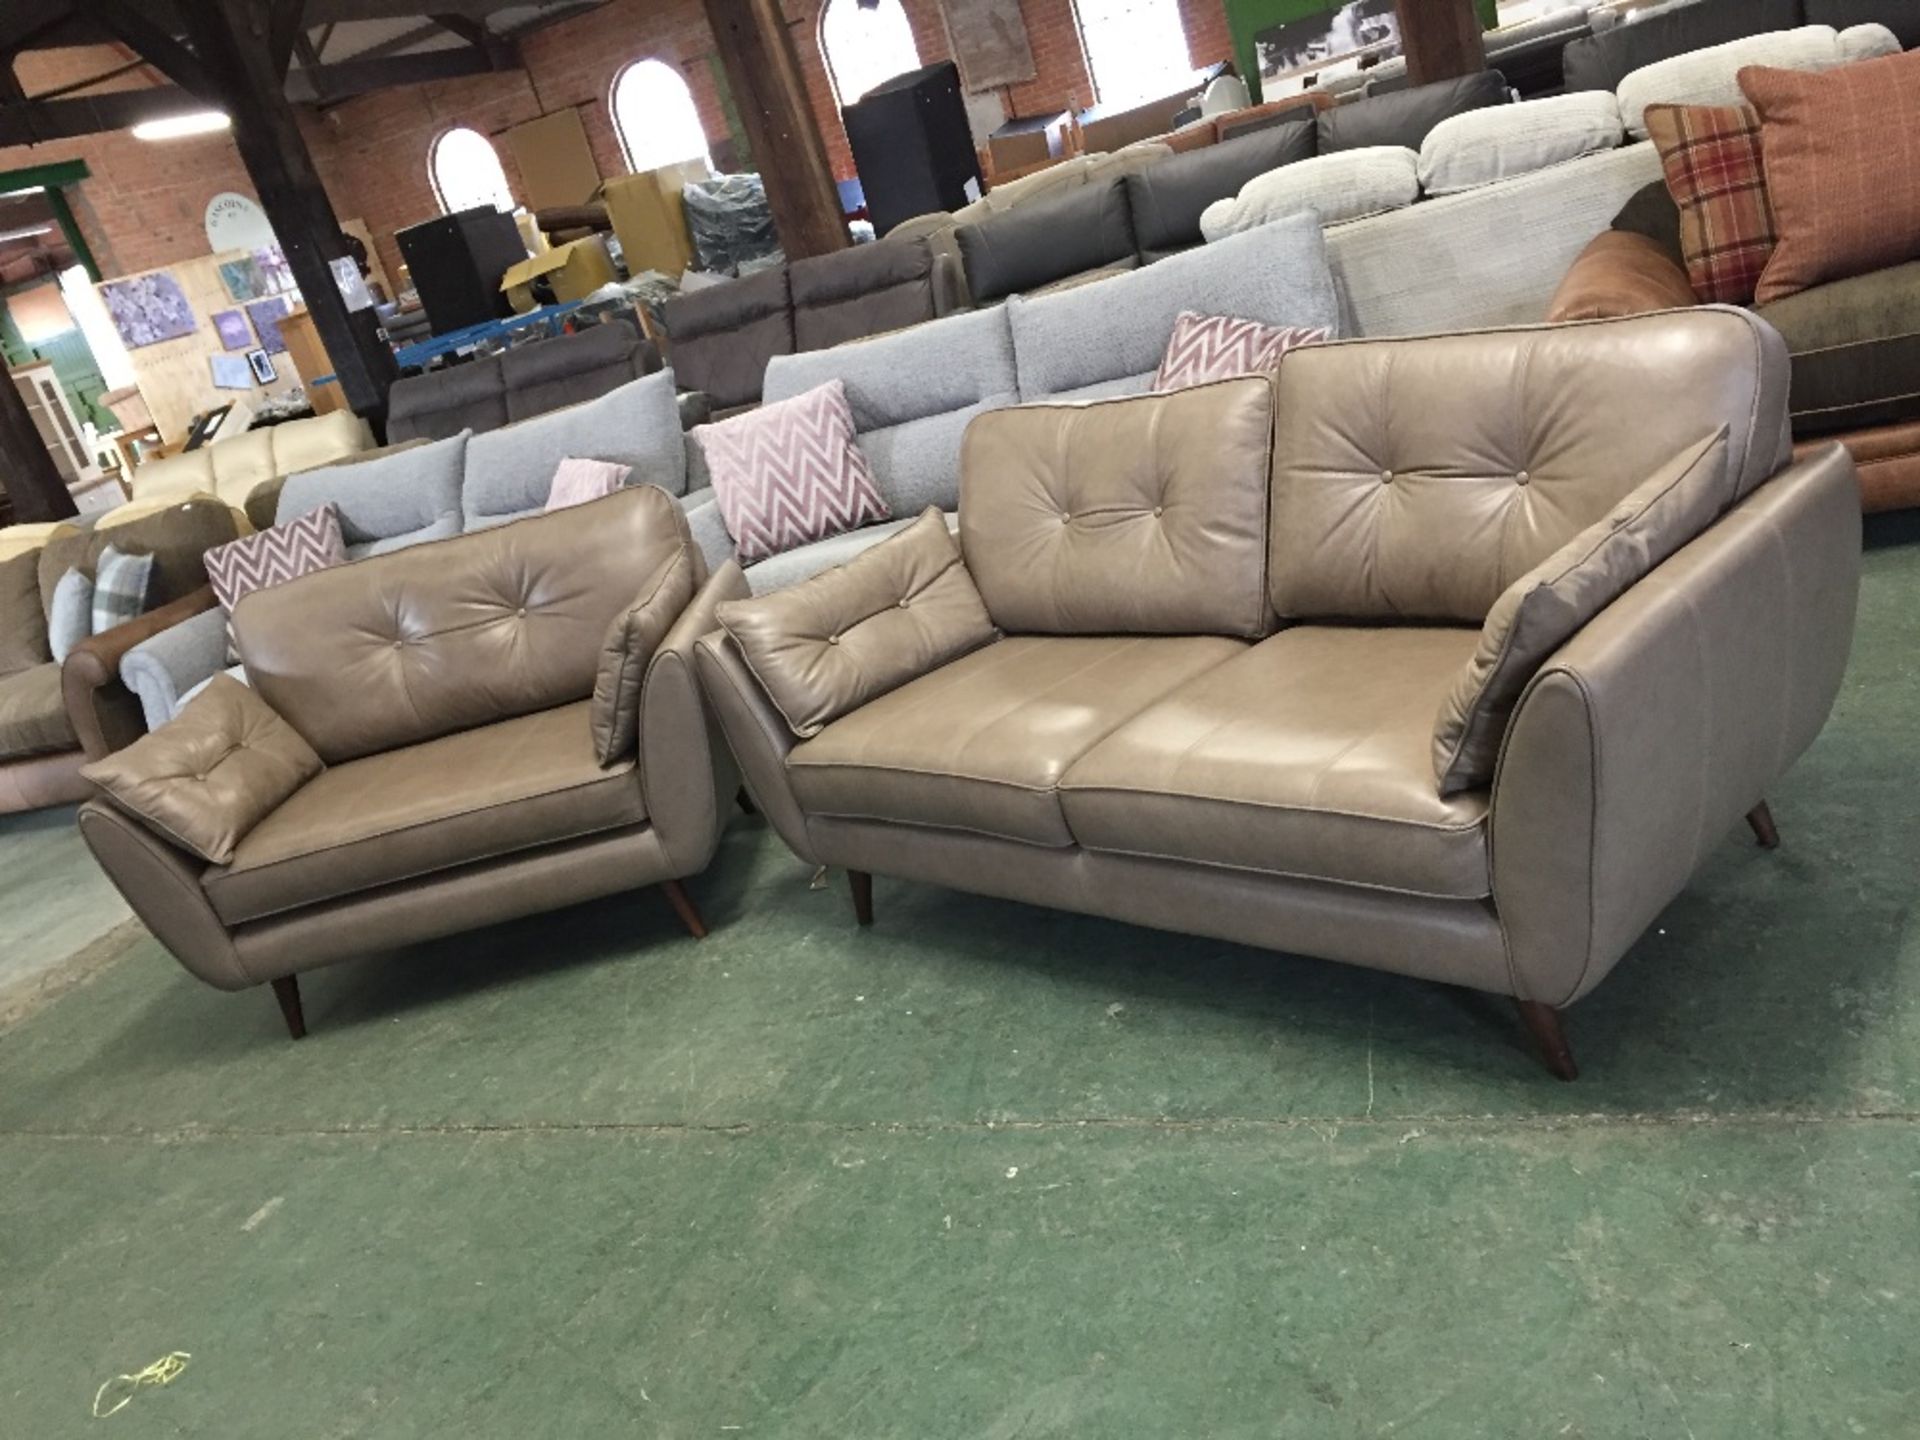 BEIGE LEATHER 3 SEATER SOFA AND SNUG CHAIR